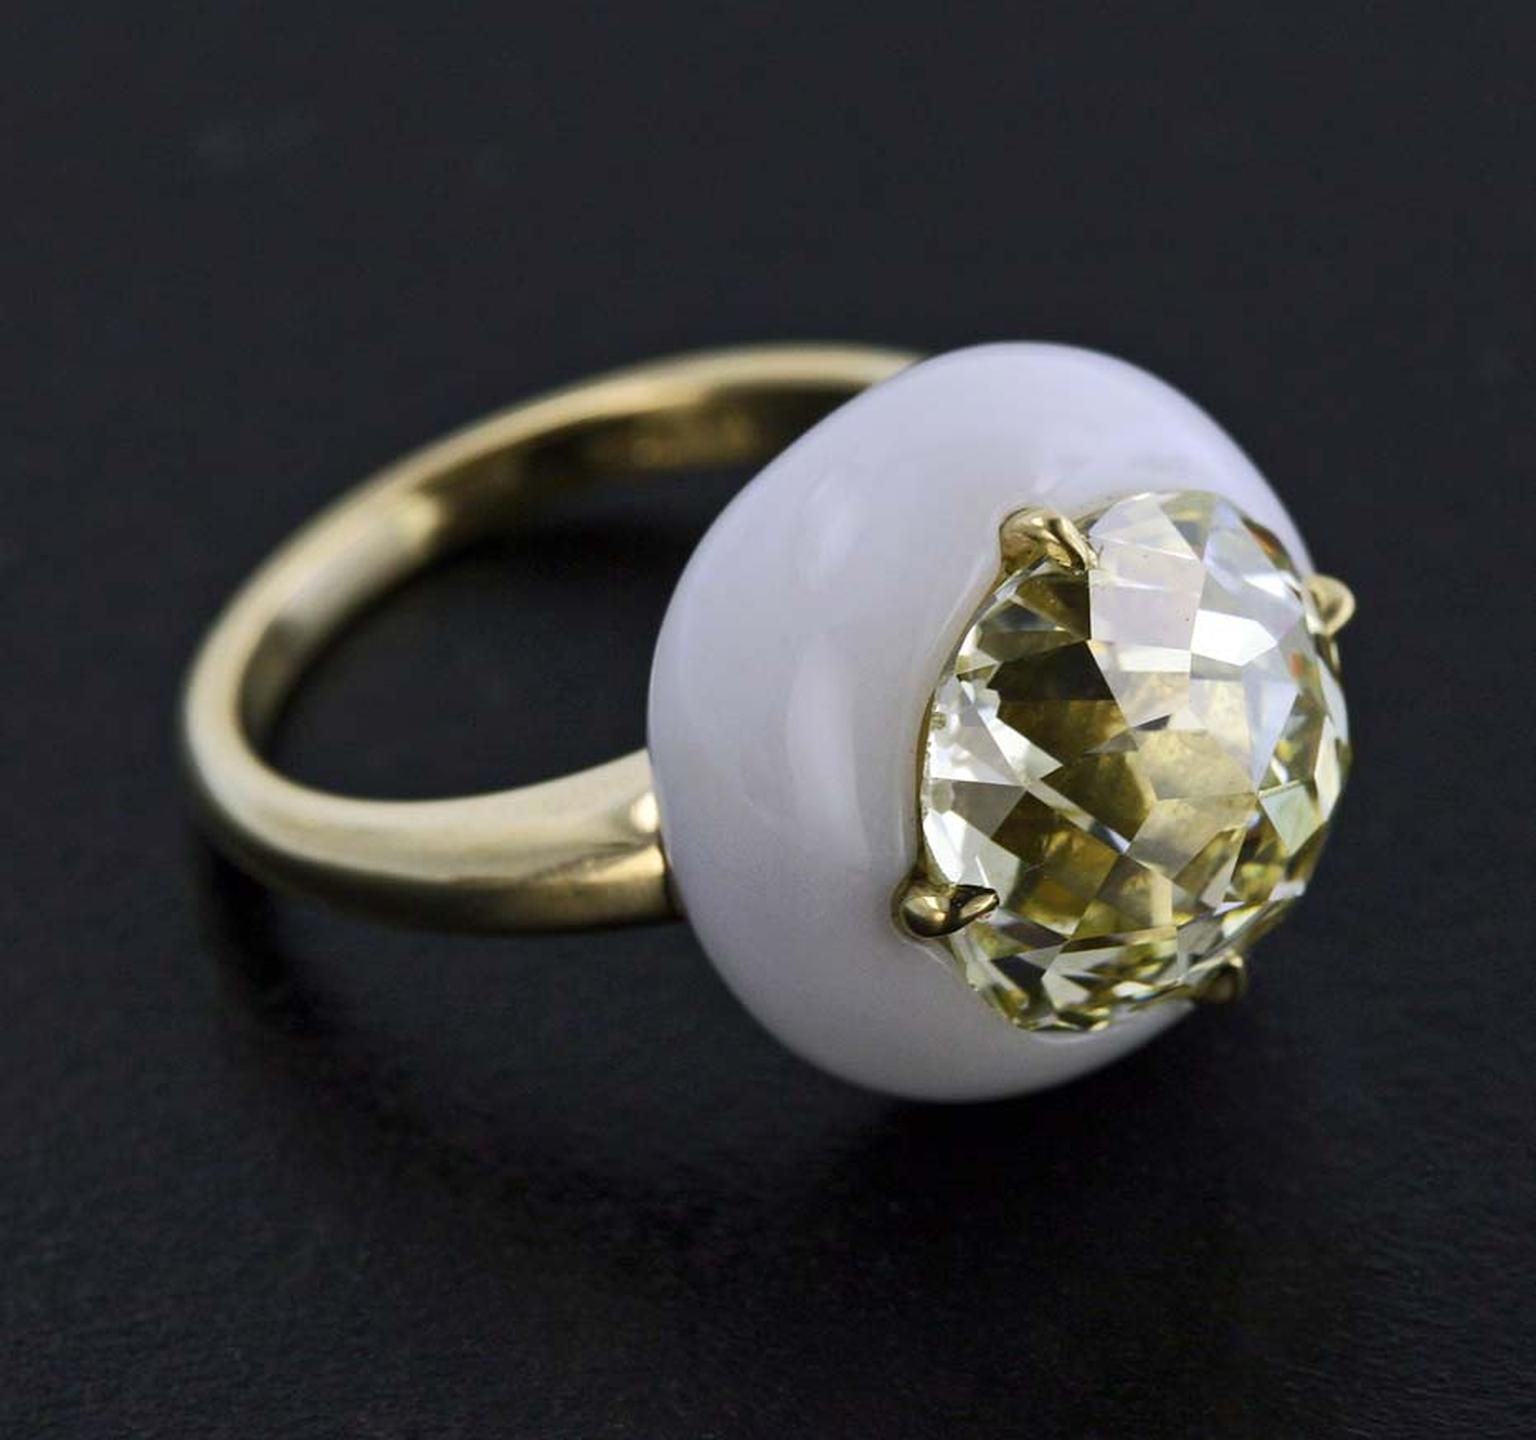 James de Givenchy Taffin Jubilee Cut diamond, cacholong and yellow gold ring.